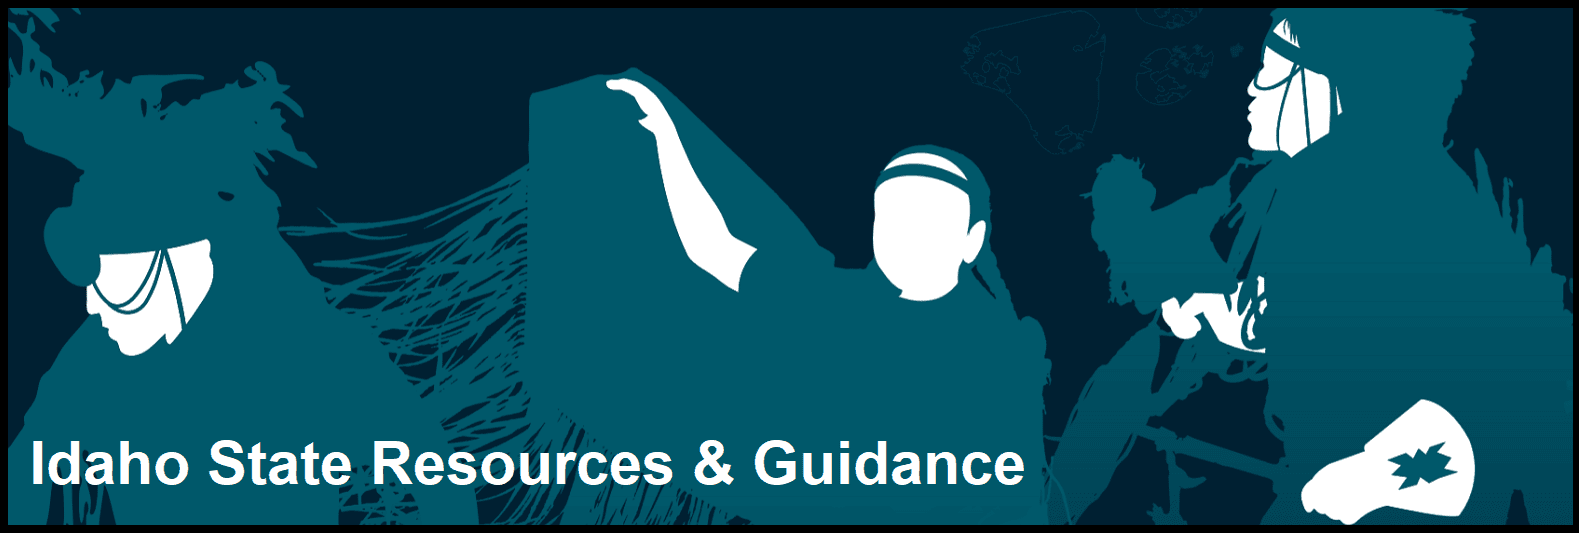 Idaho State Resources & Guidance